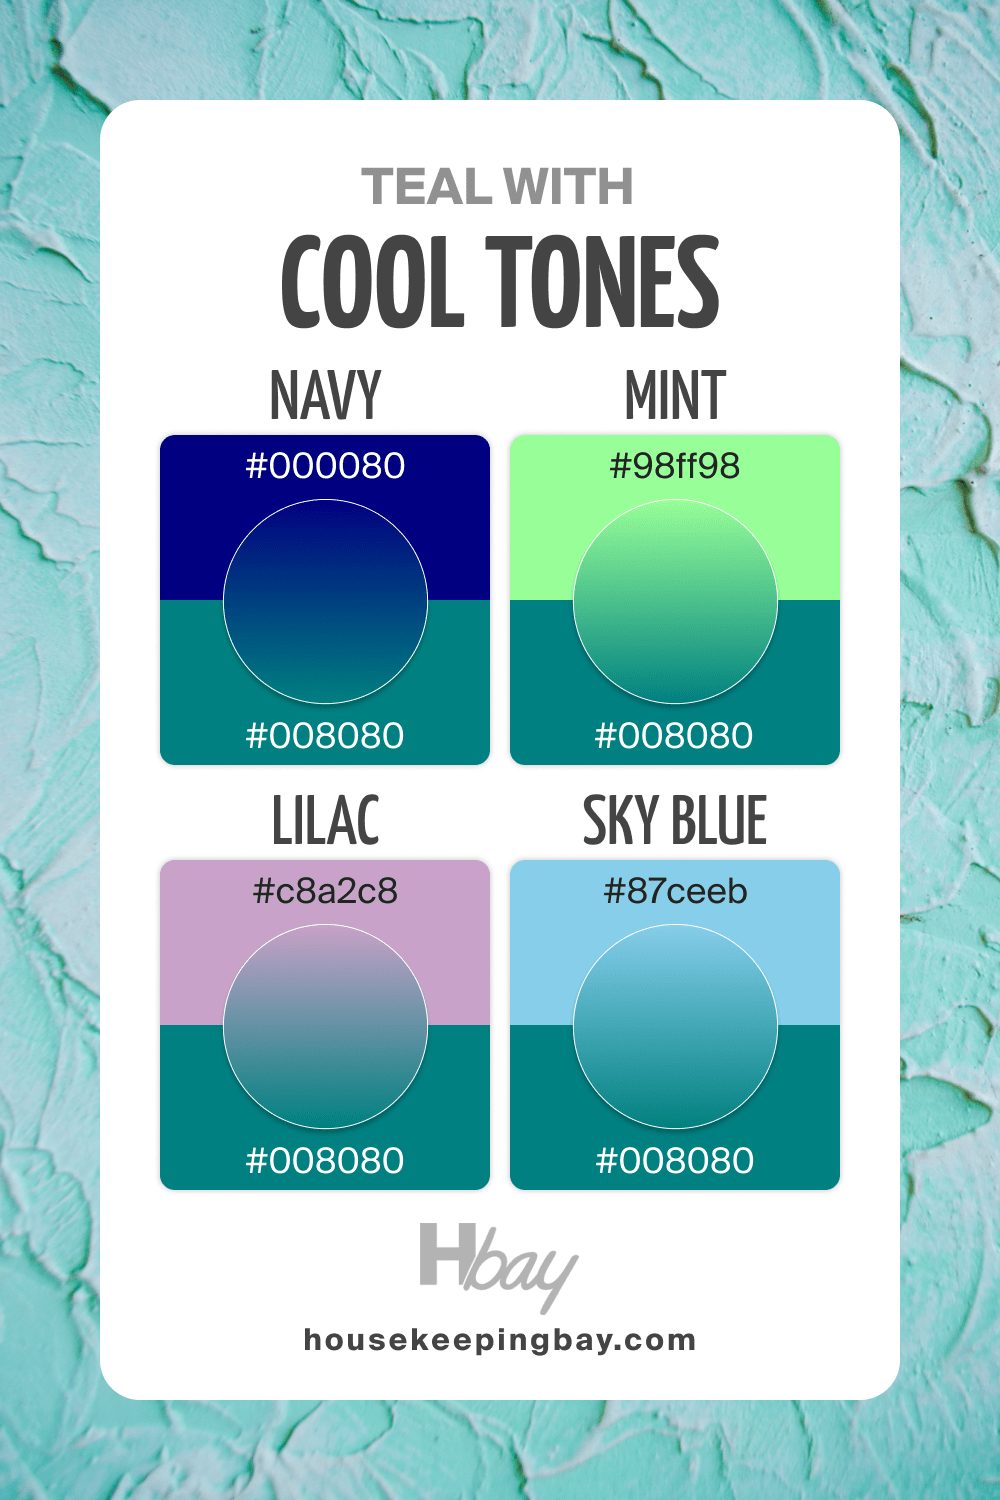 Cool Tones with Teal